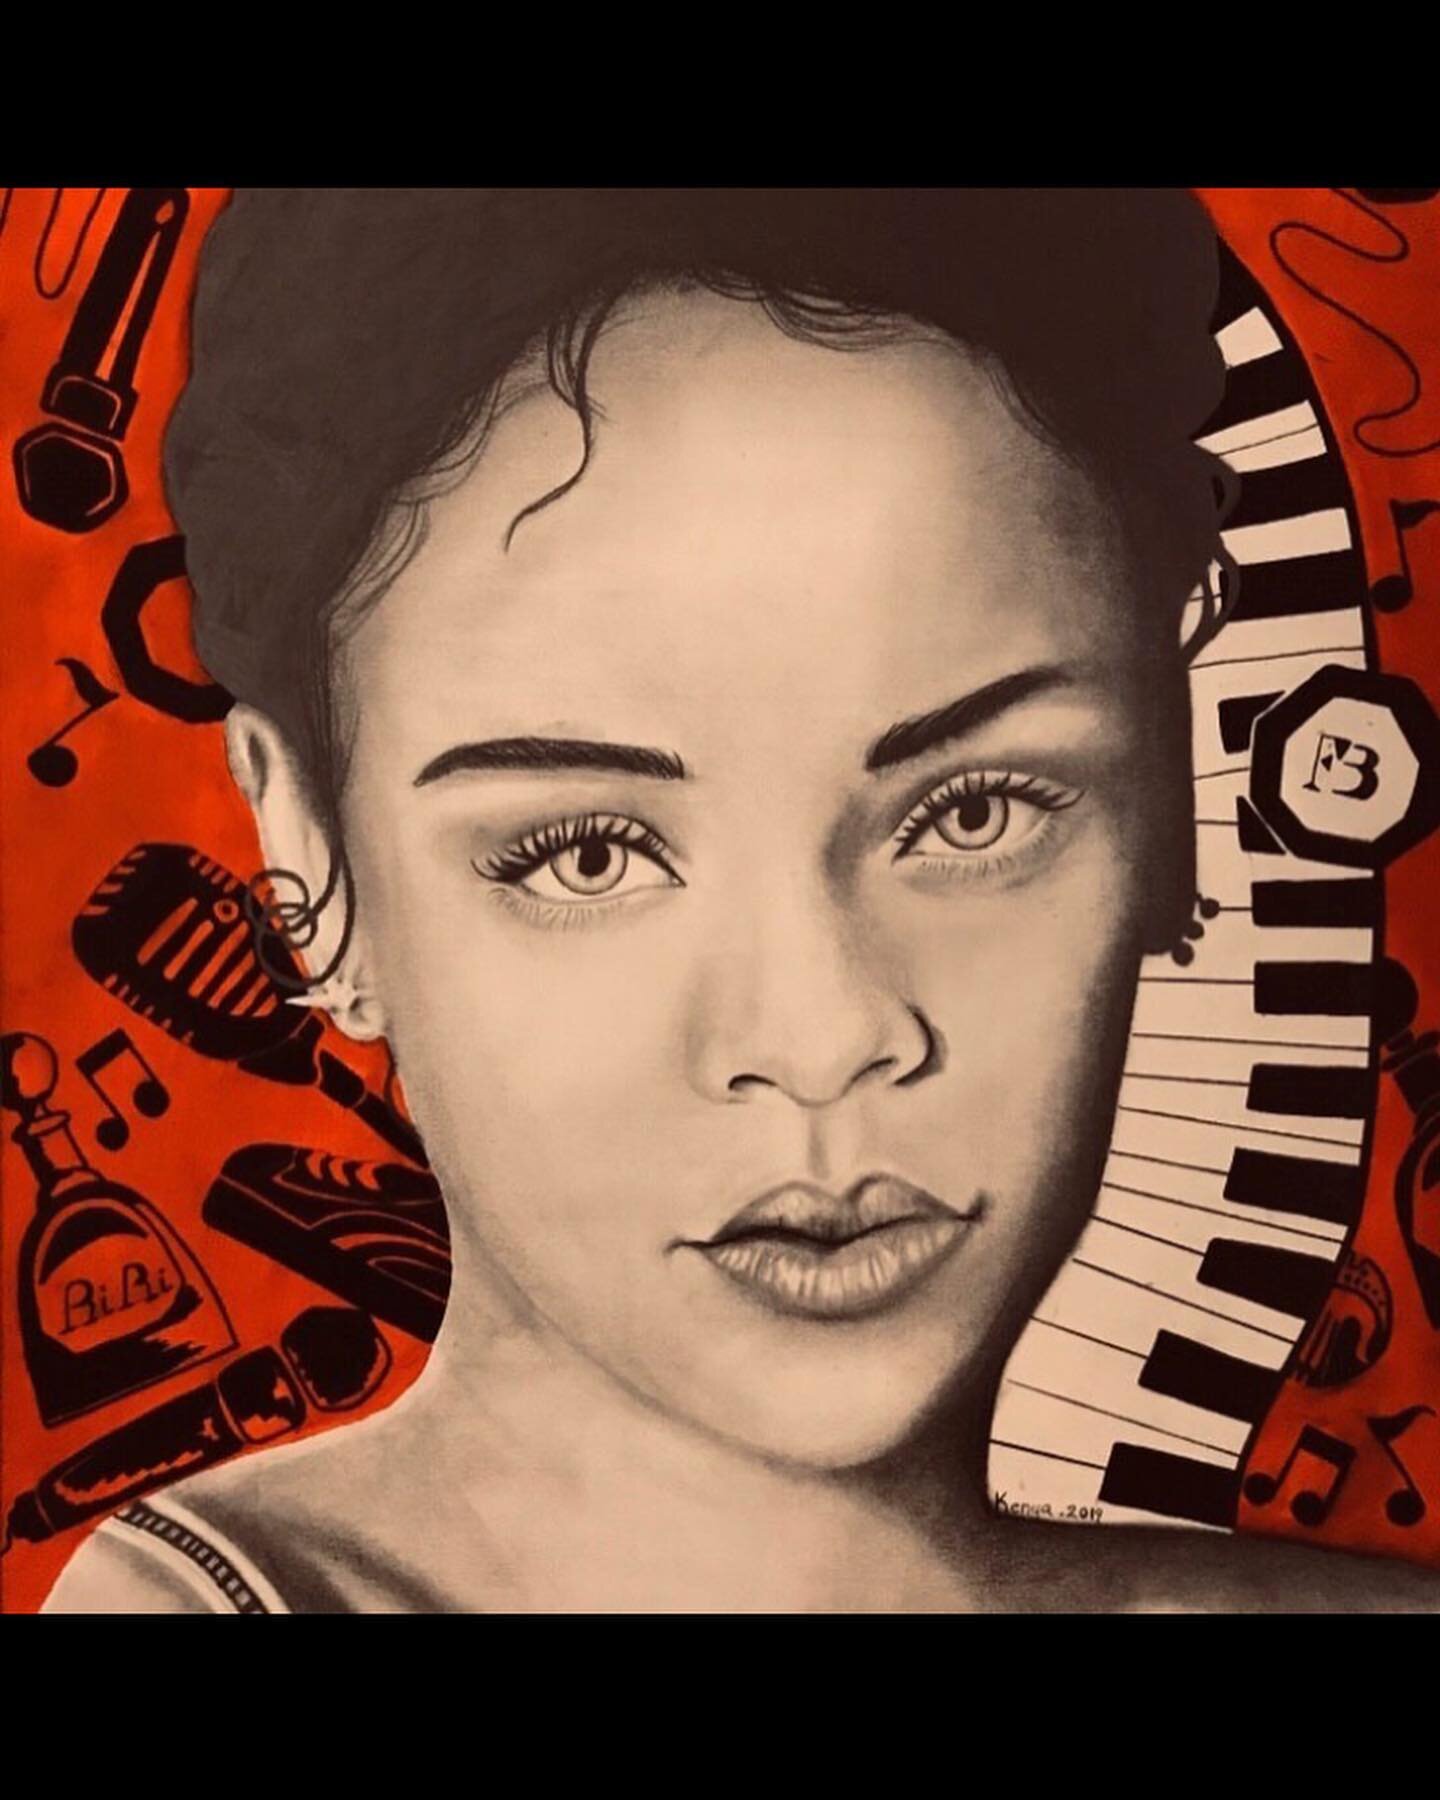 Wexford VMA Class of 2020 presents: Kenya Mathlin @kenya_draws @kenya_s_m

Type of work: I like to use graphite pencil, China marker, paint and recently started digital art.
A tip would be to never stop drawing even when you don&rsquo;t like it becau